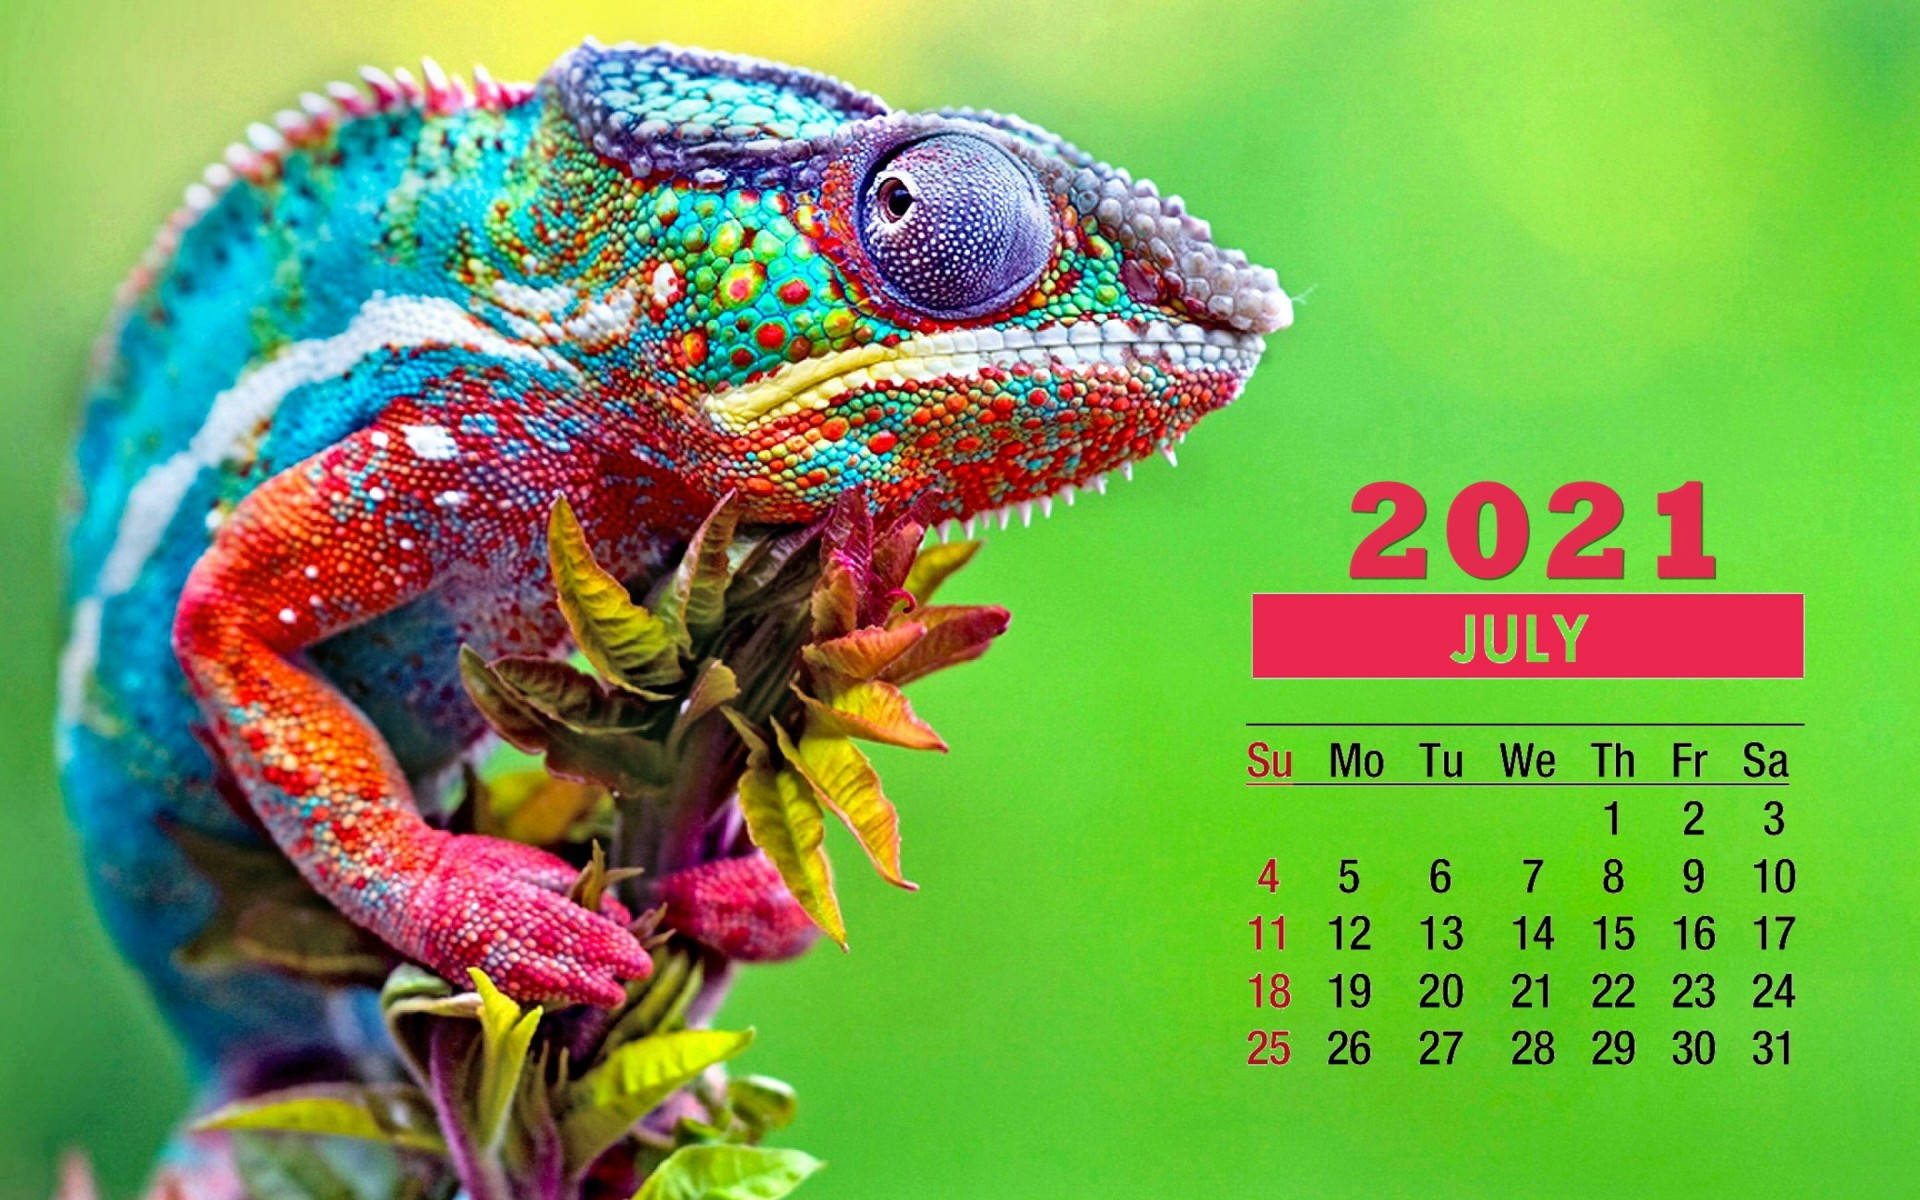 Welcome To July With The Colorful Chameleon 2021 Calendar! Background